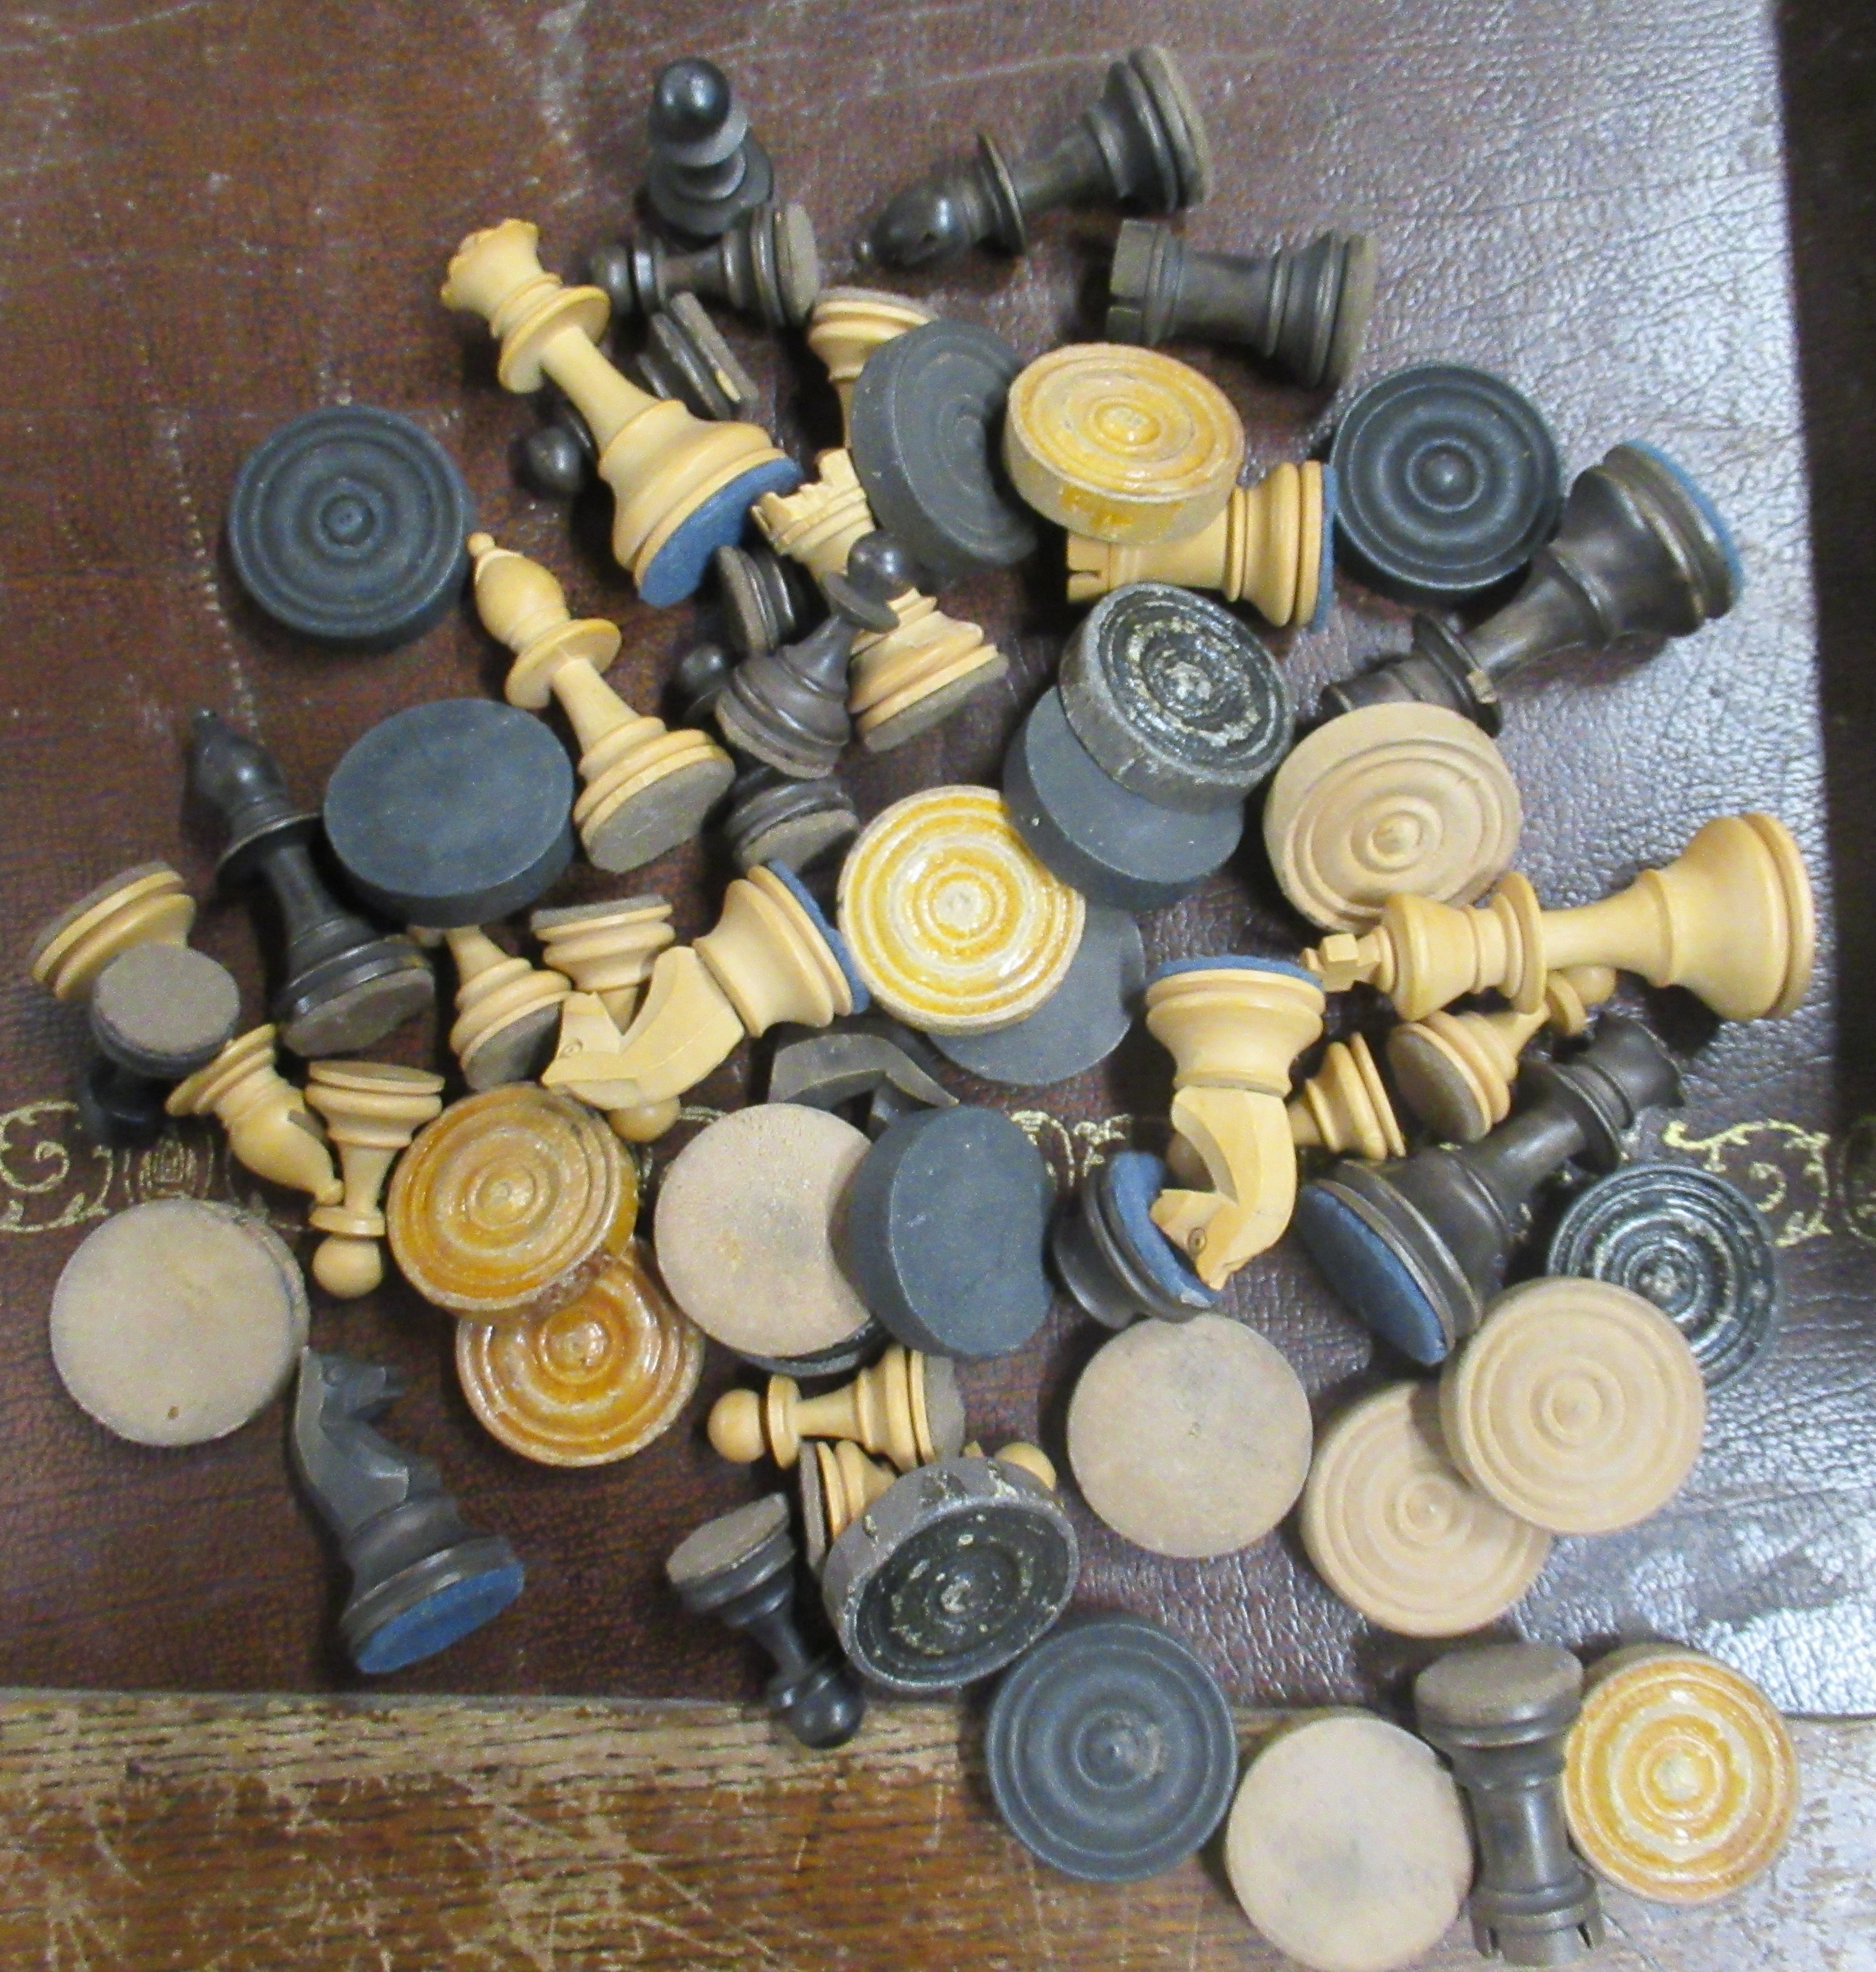 A collection of wooden chess and draughts pieces